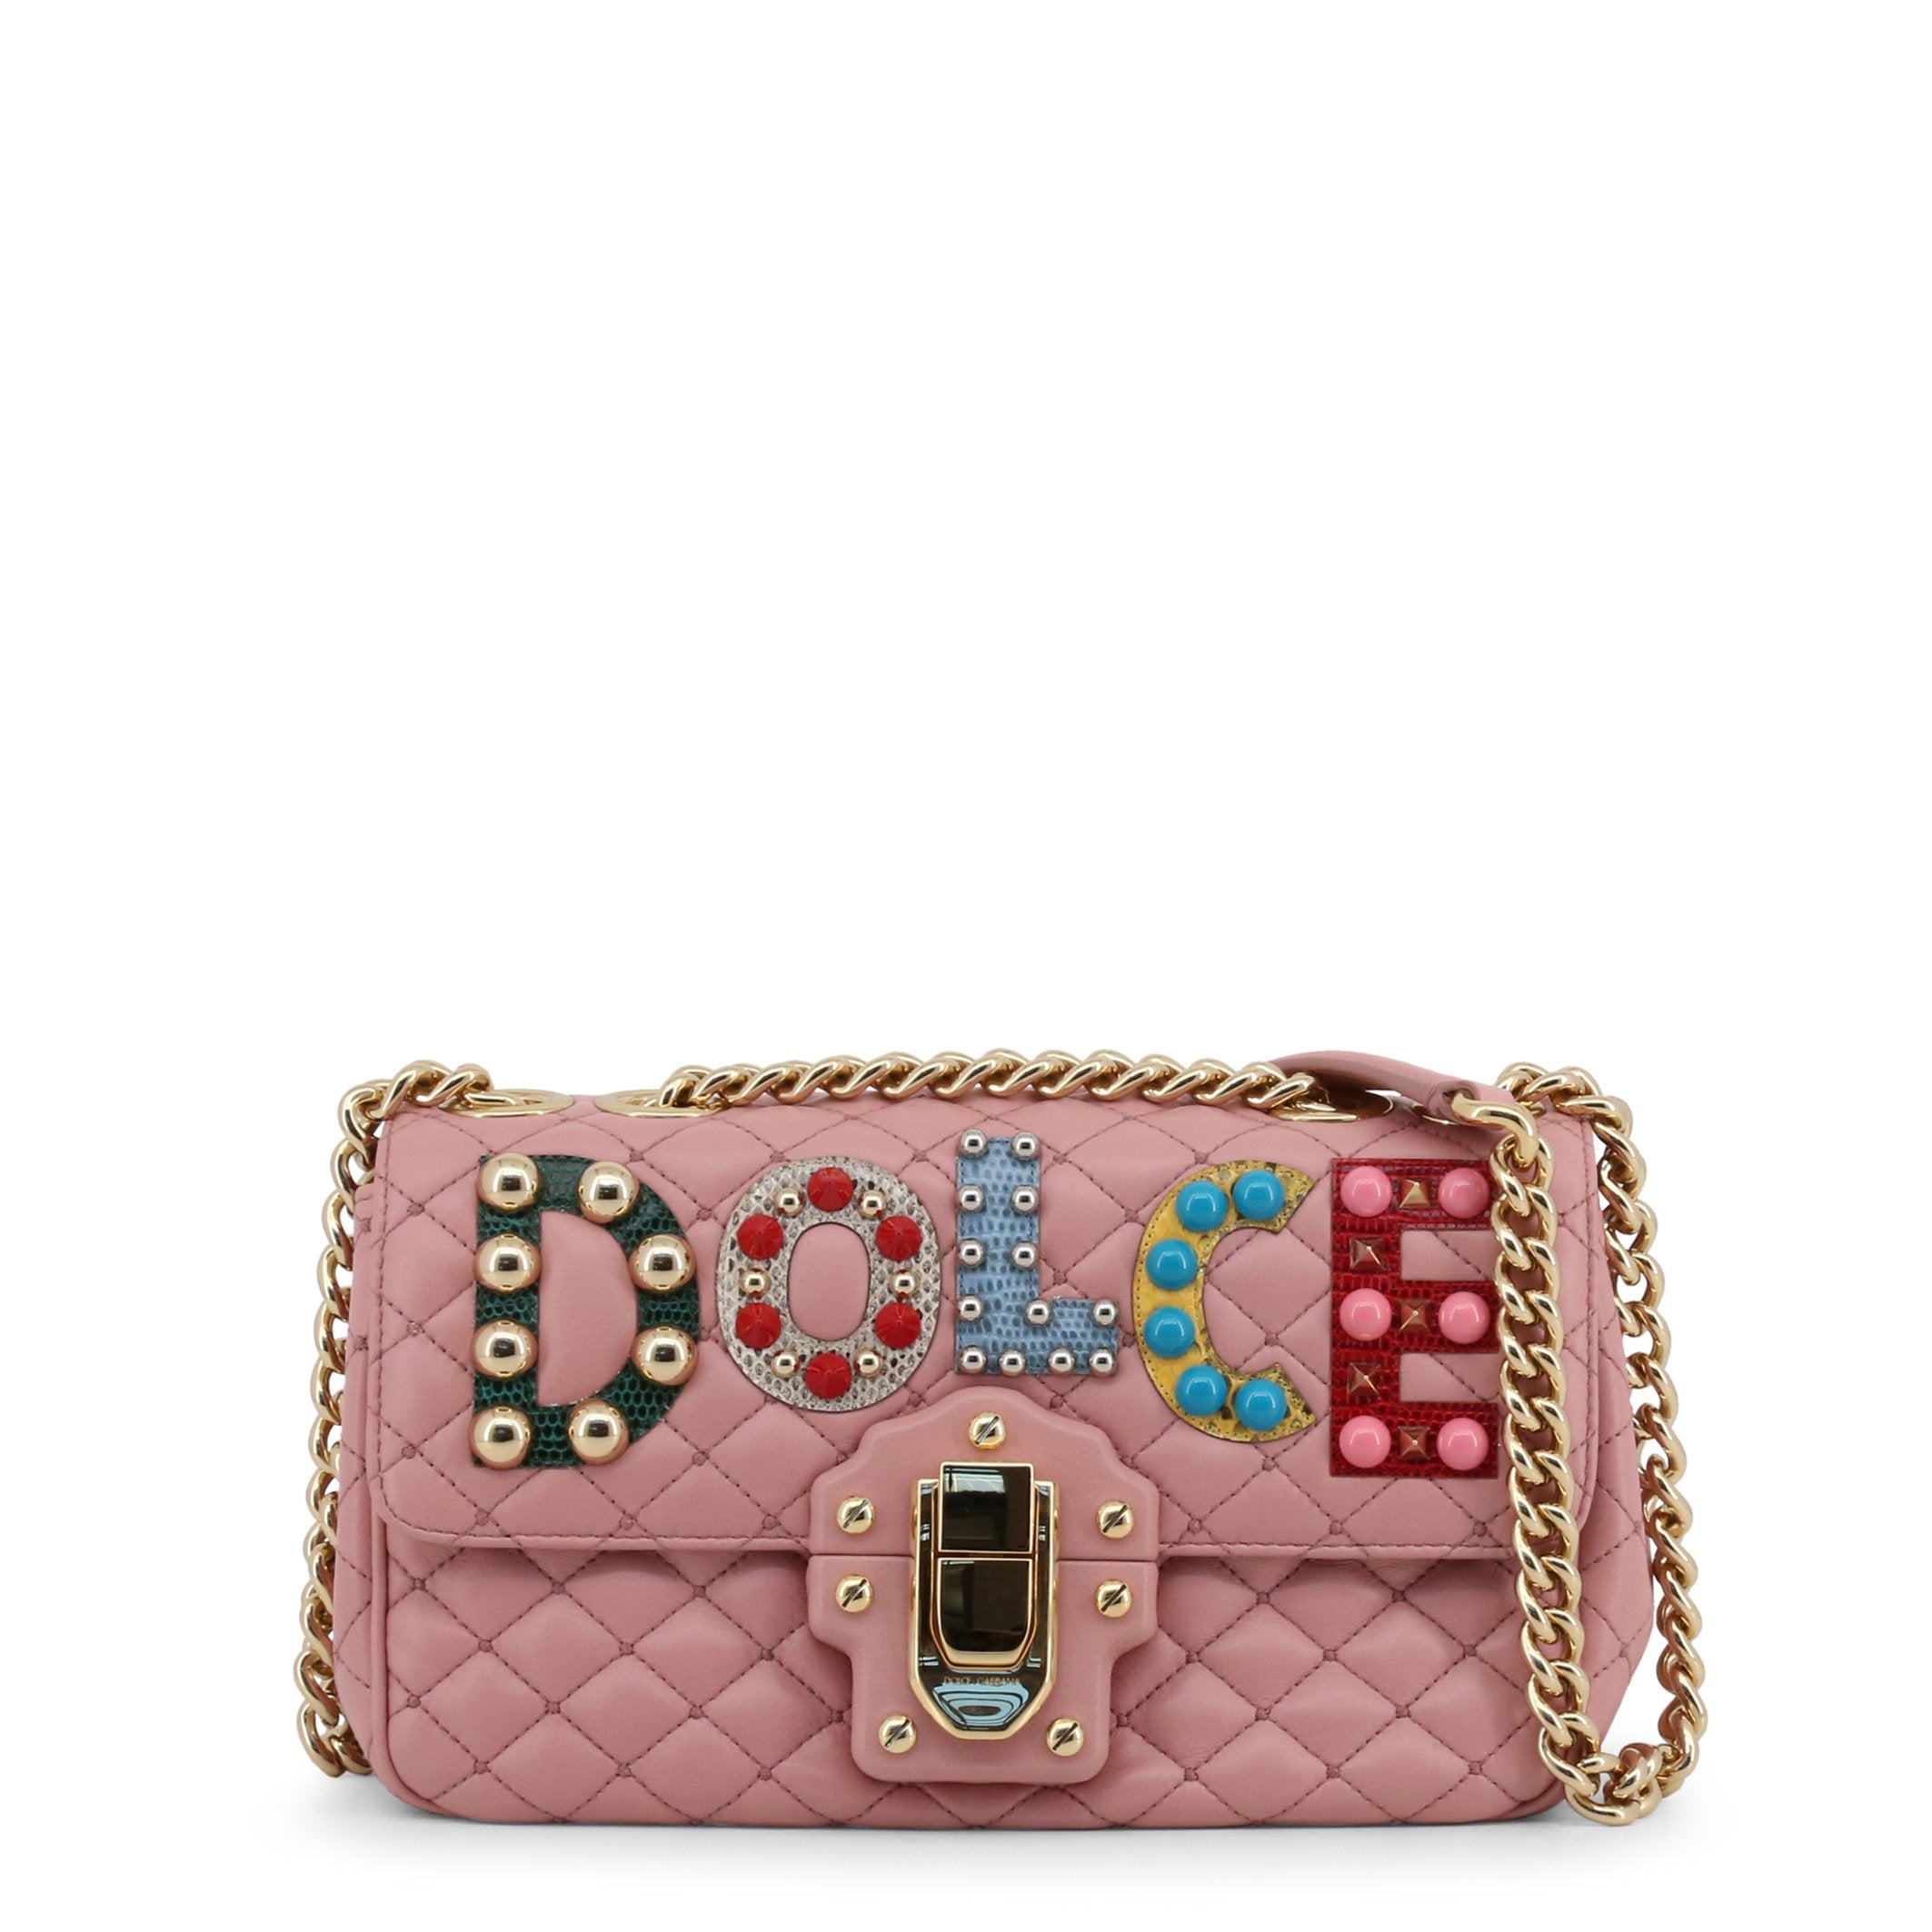 Buy & Consign Authentic Dolce & Gabbana Lambskin Watersnake Embellished Shoulder Bag Pink at The Plush Posh